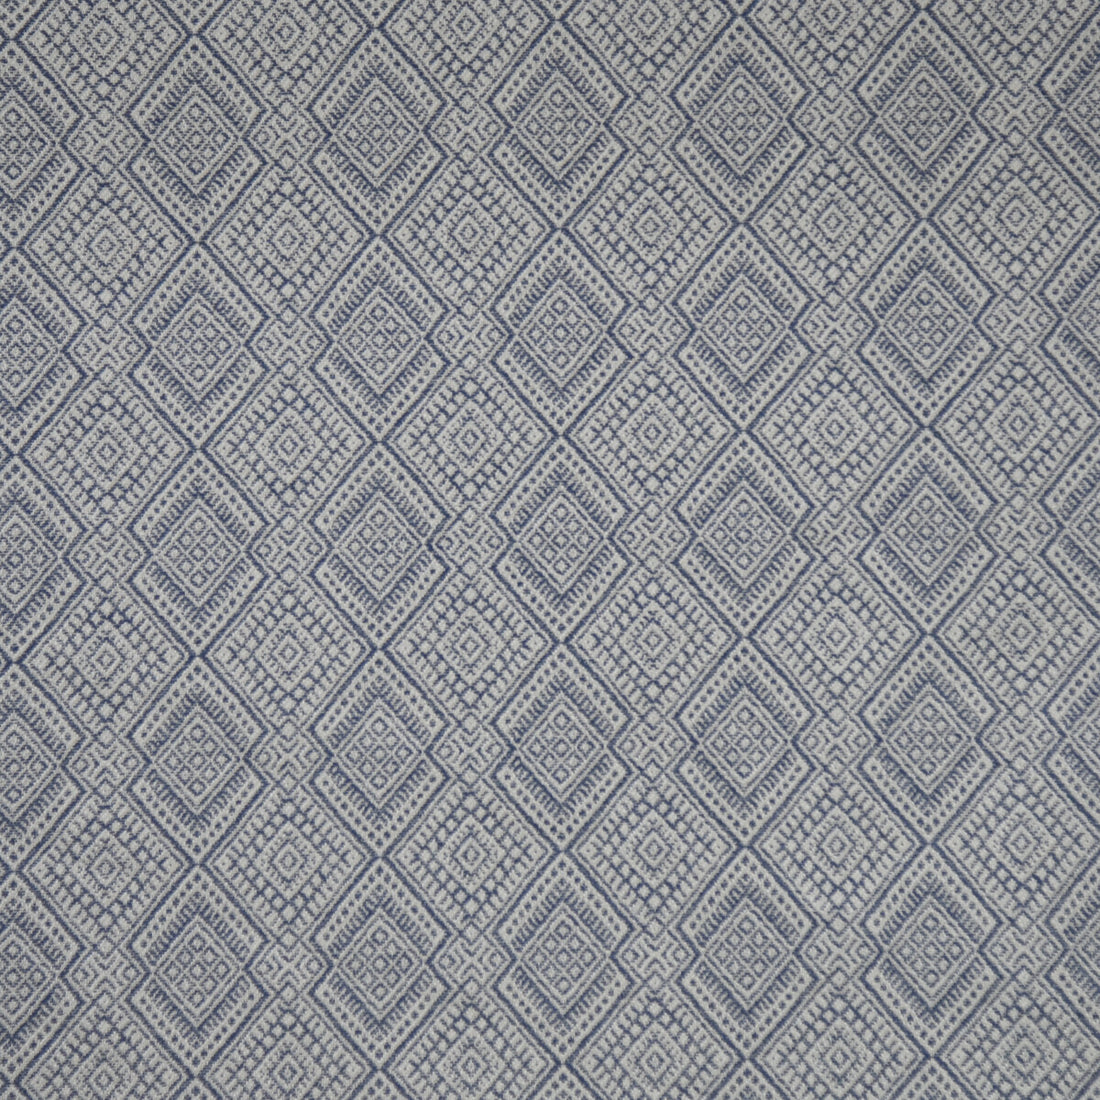 Iguazu fabric in royal color - pattern 35551.51.0 - by Kravet Couture in the Modern Colors-Sojourn Collection collection